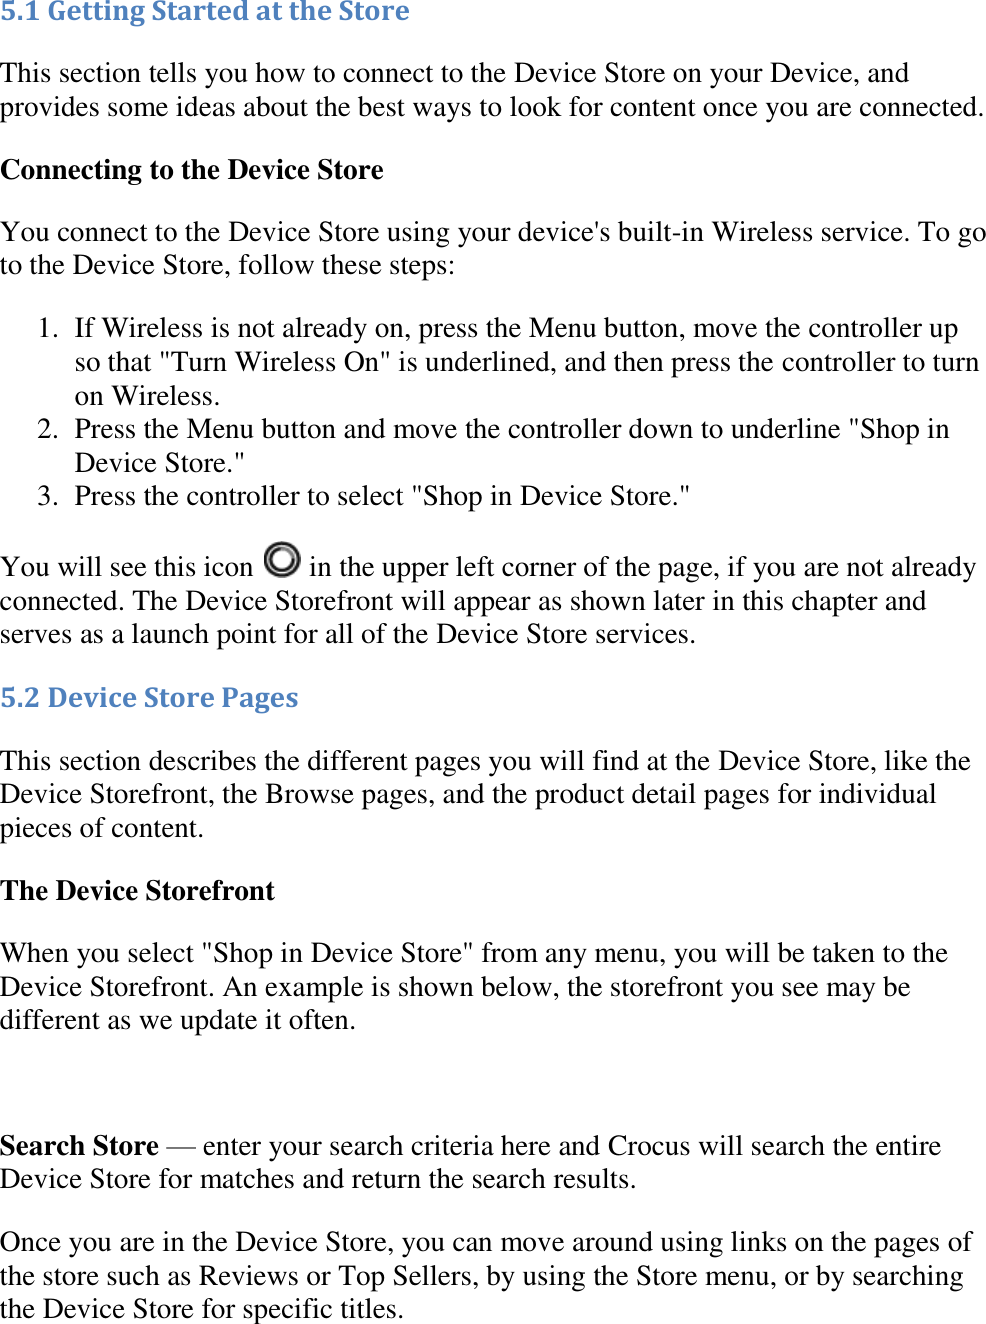   5.1 Getting Started at the Store This section tells you how to connect to the Device Store on your Device, and provides some ideas about the best ways to look for content once you are connected. Connecting to the Device Store You connect to the Device Store using your device&apos;s built-in Wireless service. To go to the Device Store, follow these steps: 1. If Wireless is not already on, press the Menu button, move the controller up so that &quot;Turn Wireless On&quot; is underlined, and then press the controller to turn on Wireless.  2. Press the Menu button and move the controller down to underline &quot;Shop in Device Store.&quot;  3. Press the controller to select &quot;Shop in Device Store.&quot;  You will see this icon   in the upper left corner of the page, if you are not already connected. The Device Storefront will appear as shown later in this chapter and serves as a launch point for all of the Device Store services. 5.2 Device Store Pages This section describes the different pages you will find at the Device Store, like the Device Storefront, the Browse pages, and the product detail pages for individual pieces of content. The Device Storefront When you select &quot;Shop in Device Store&quot; from any menu, you will be taken to the Device Storefront. An example is shown below, the storefront you see may be different as we update it often.   Search Store — enter your search criteria here and Crocus will search the entire Device Store for matches and return the search results. Once you are in the Device Store, you can move around using links on the pages of the store such as Reviews or Top Sellers, by using the Store menu, or by searching the Device Store for specific titles. 